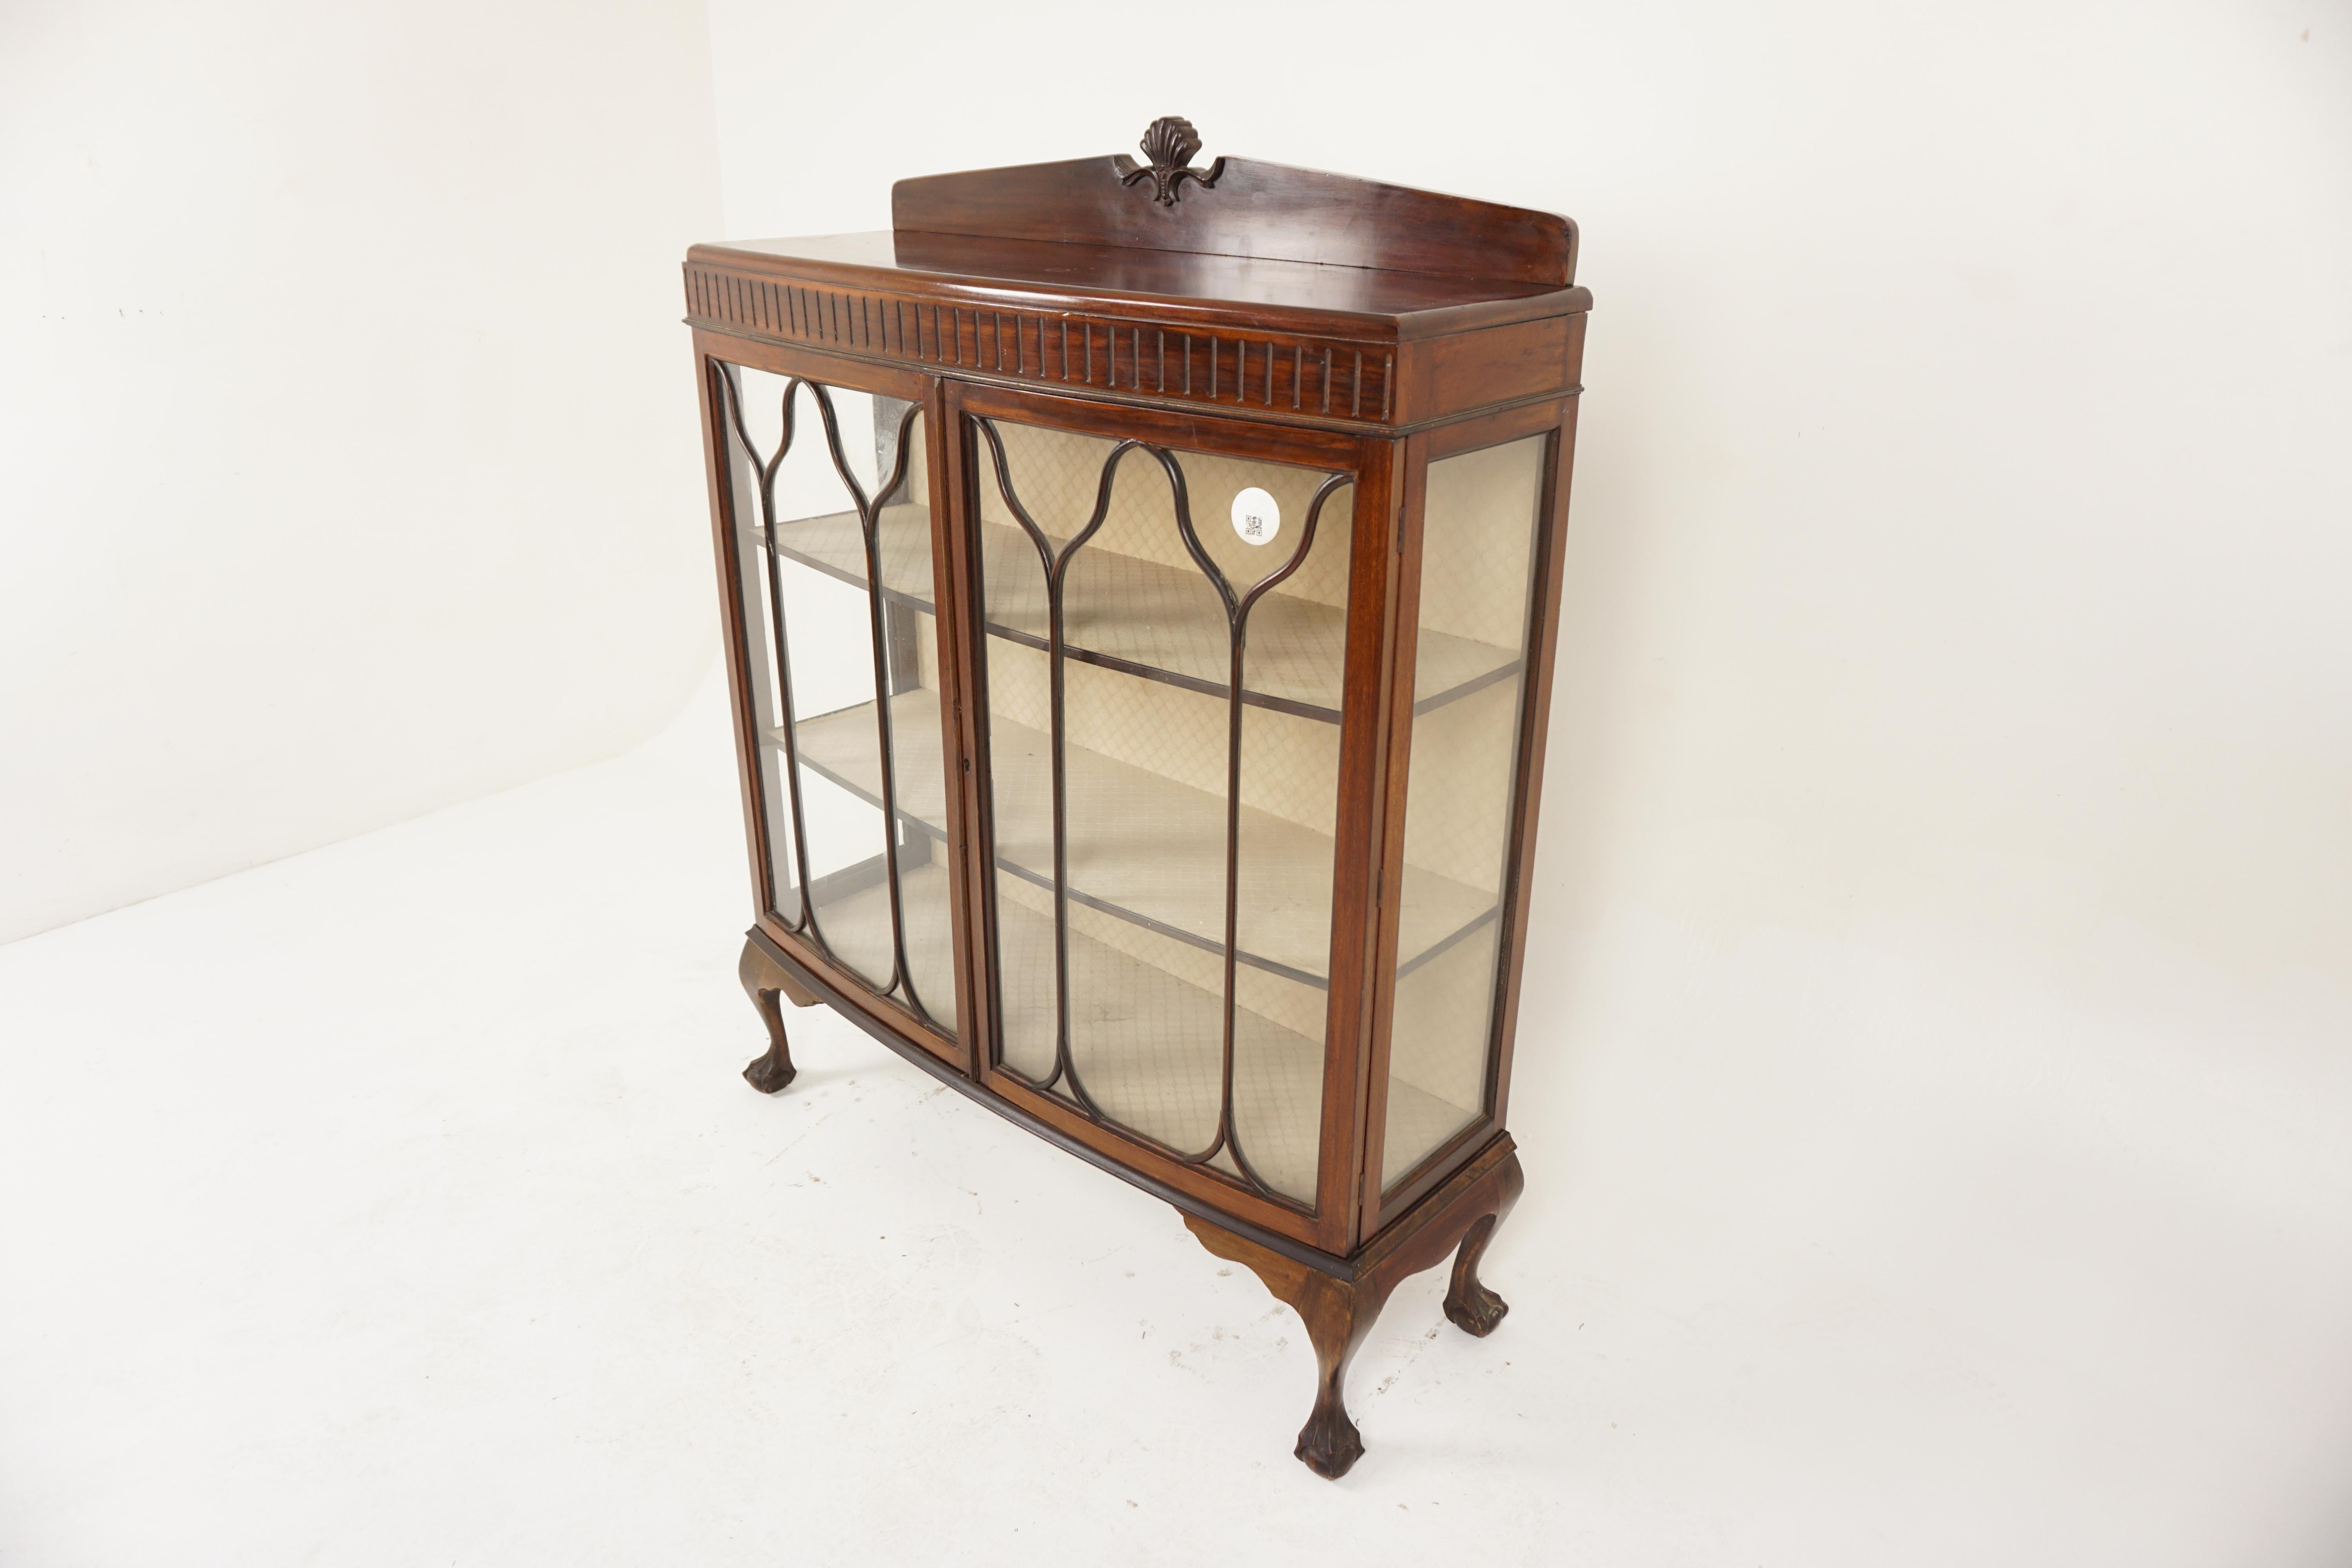 Vintage Two Door Walnut China Cabinet, Display Cabinet, Scotland 1930, H1009

Solid Walnut
Original finish
Carved pediment on back
Bow front top with moulded edge
Carved frieze underneath
Pair of original glass doors with shaped design mouldings to